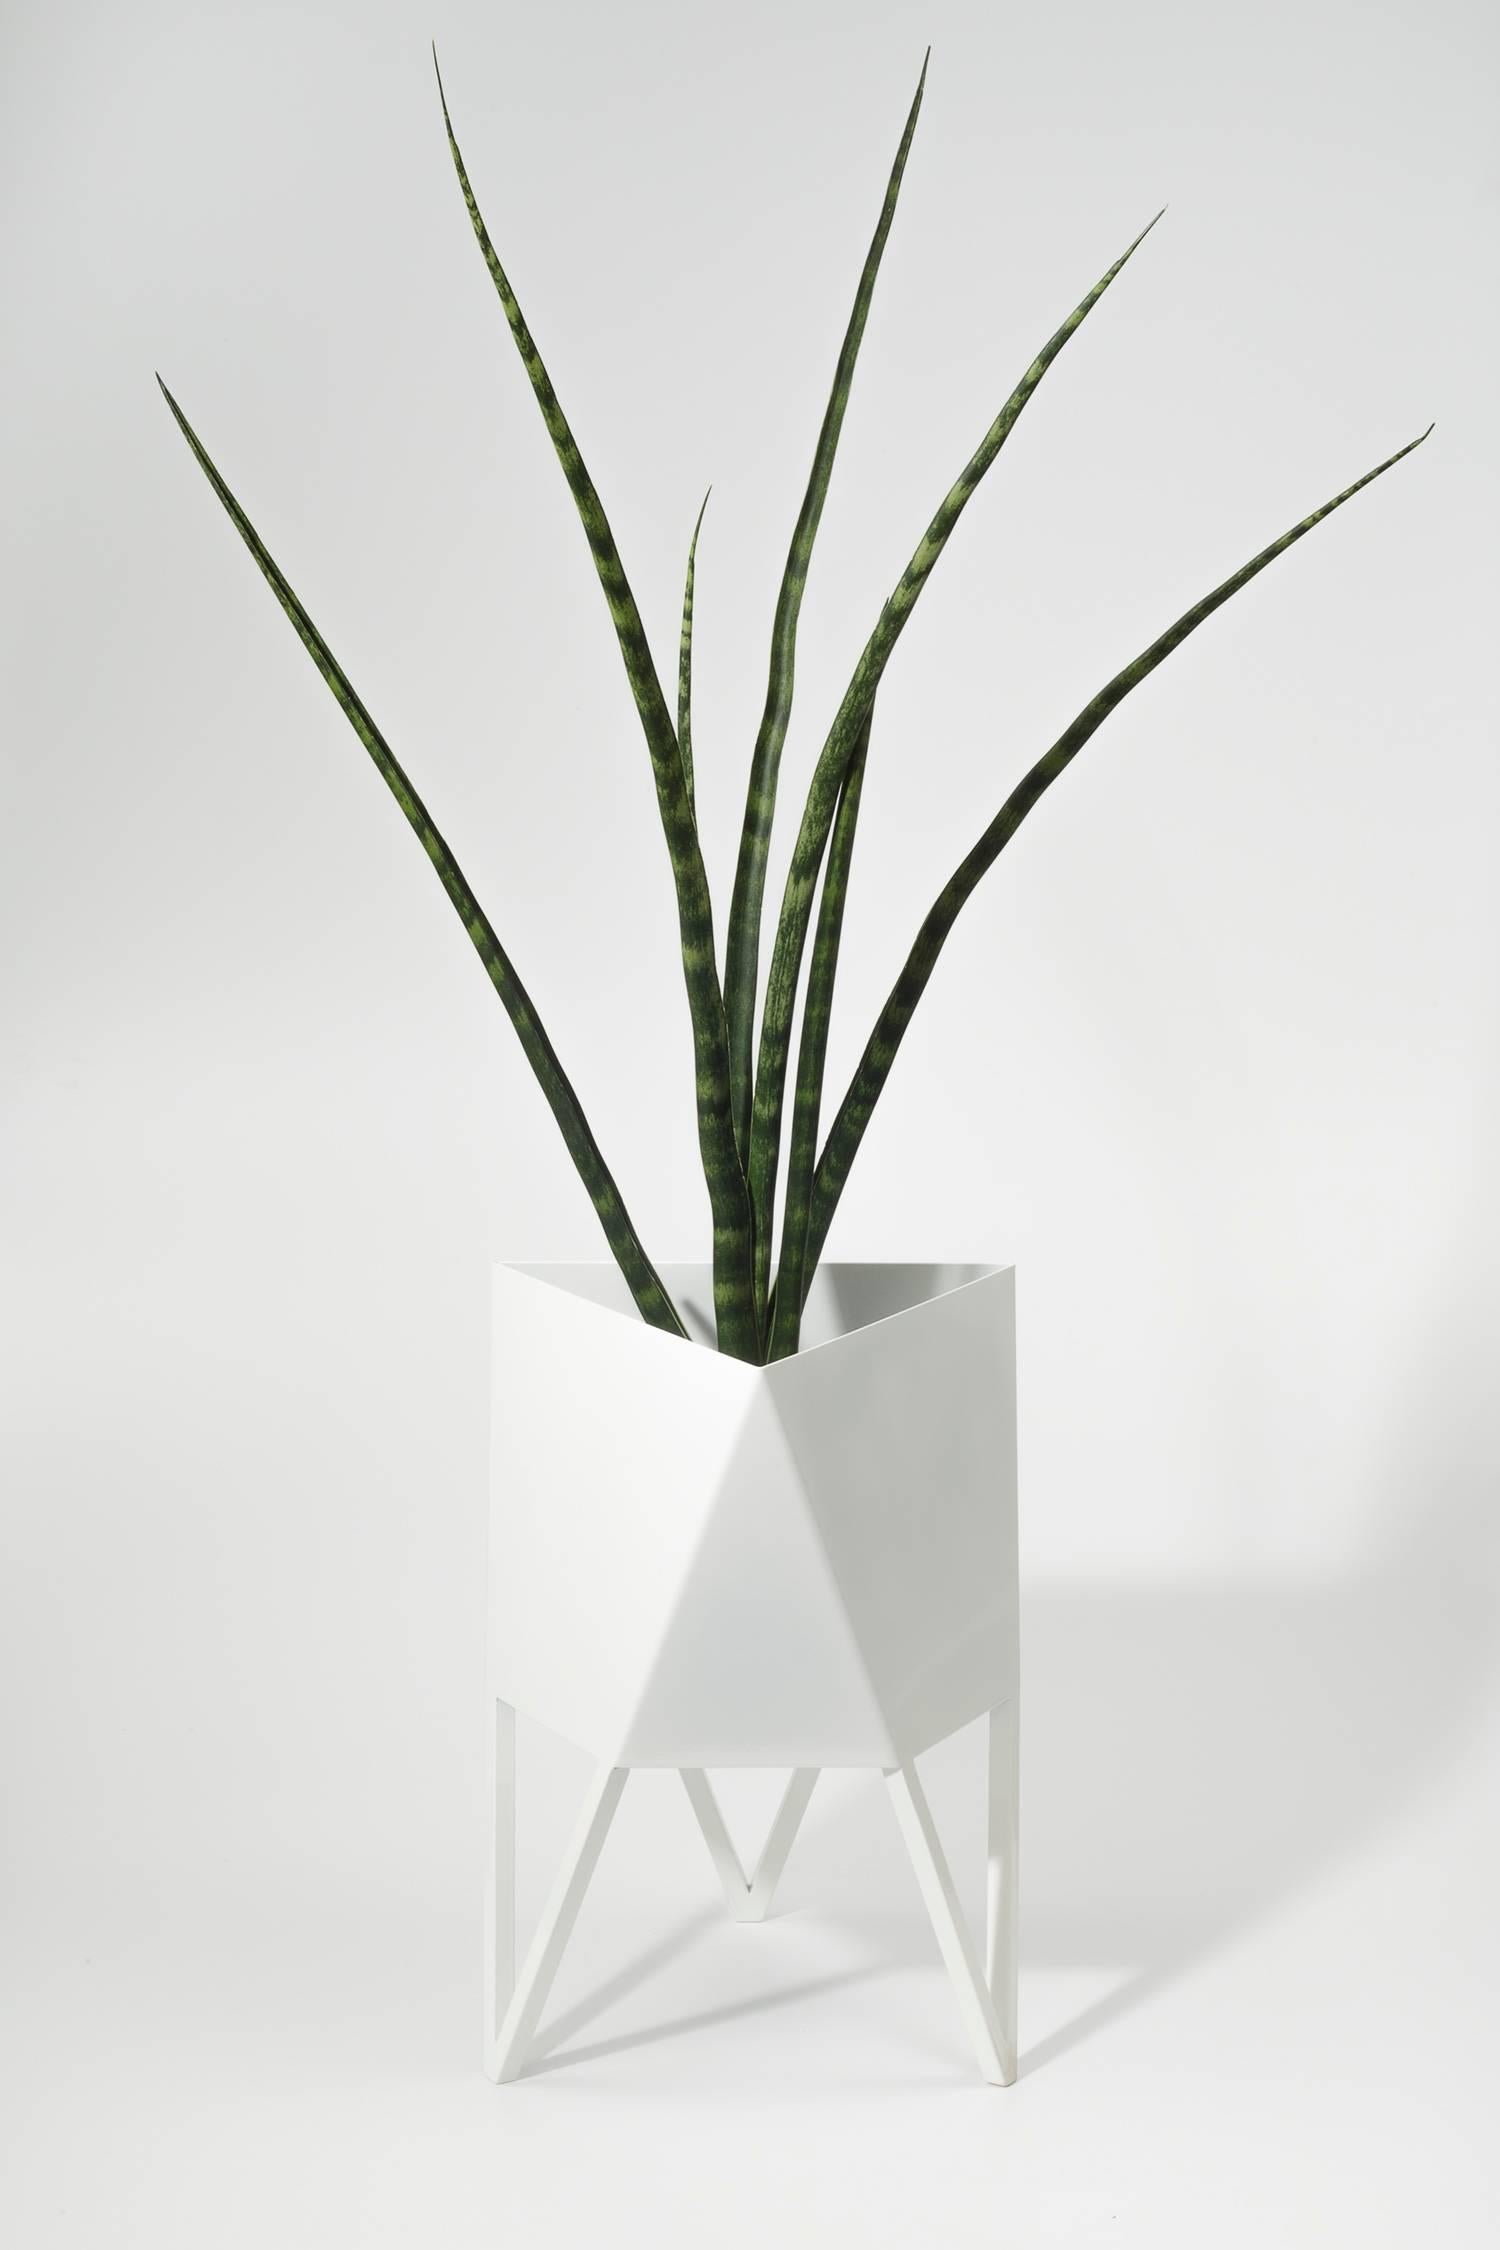 Faceted Large Deca Planter, Yellow, Steel, Powder Coated, Indoor/Outdoor, Force/Collide